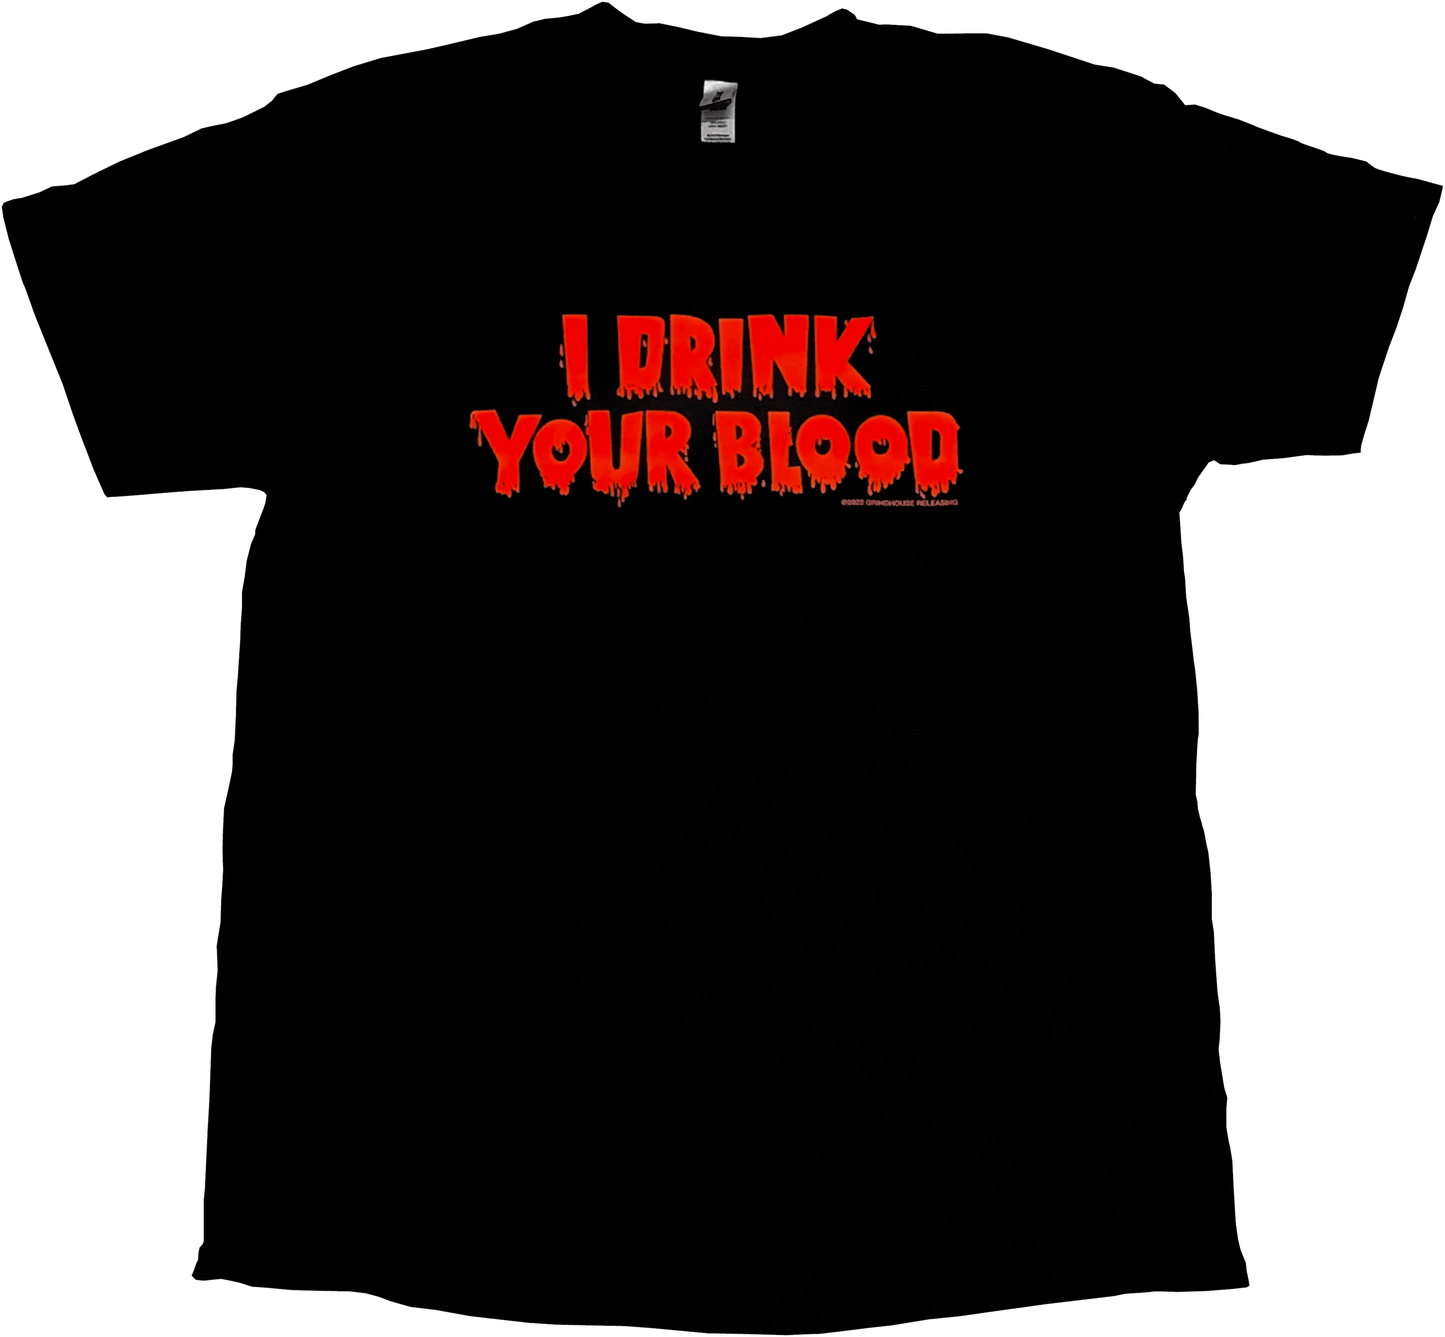 I DRINK YOUR BLOOD T-Shirt : Red Logo